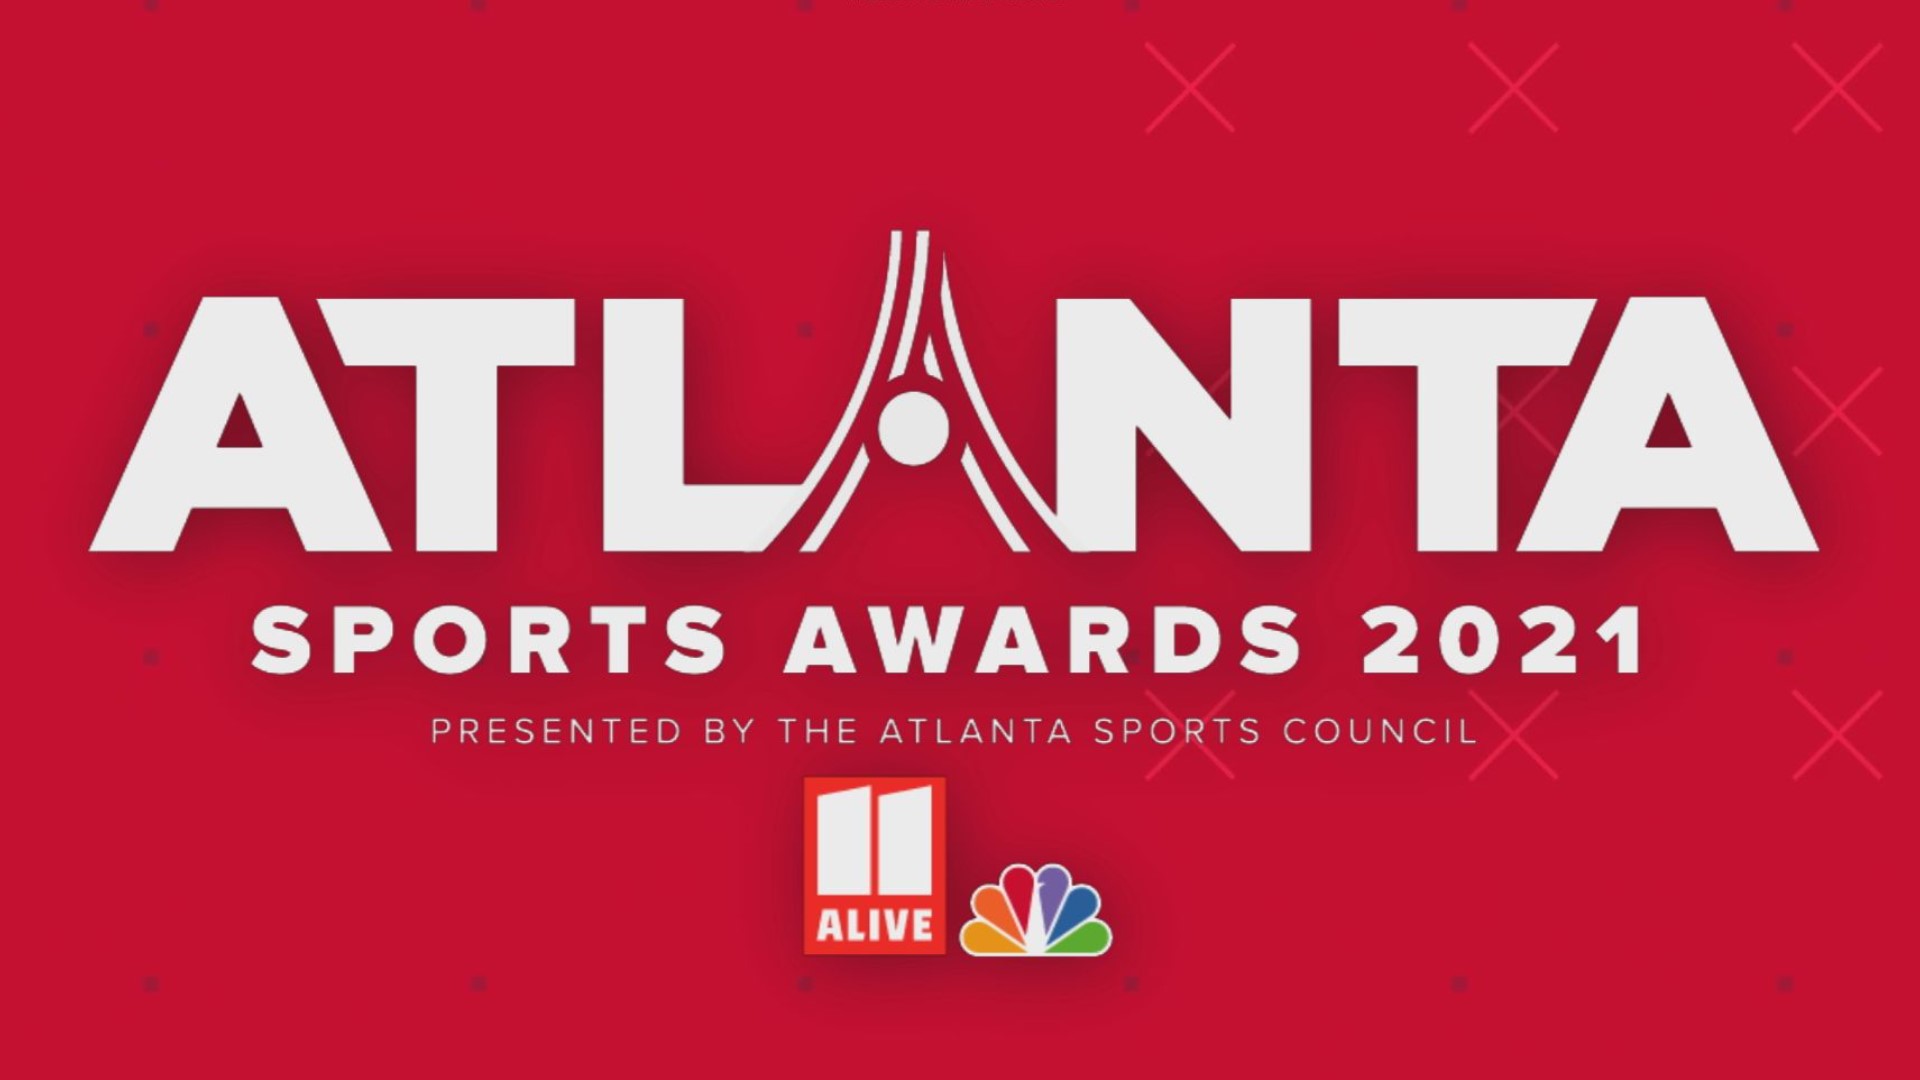 They will air on 11Alive in partnership with the Atlanta Sports Council.